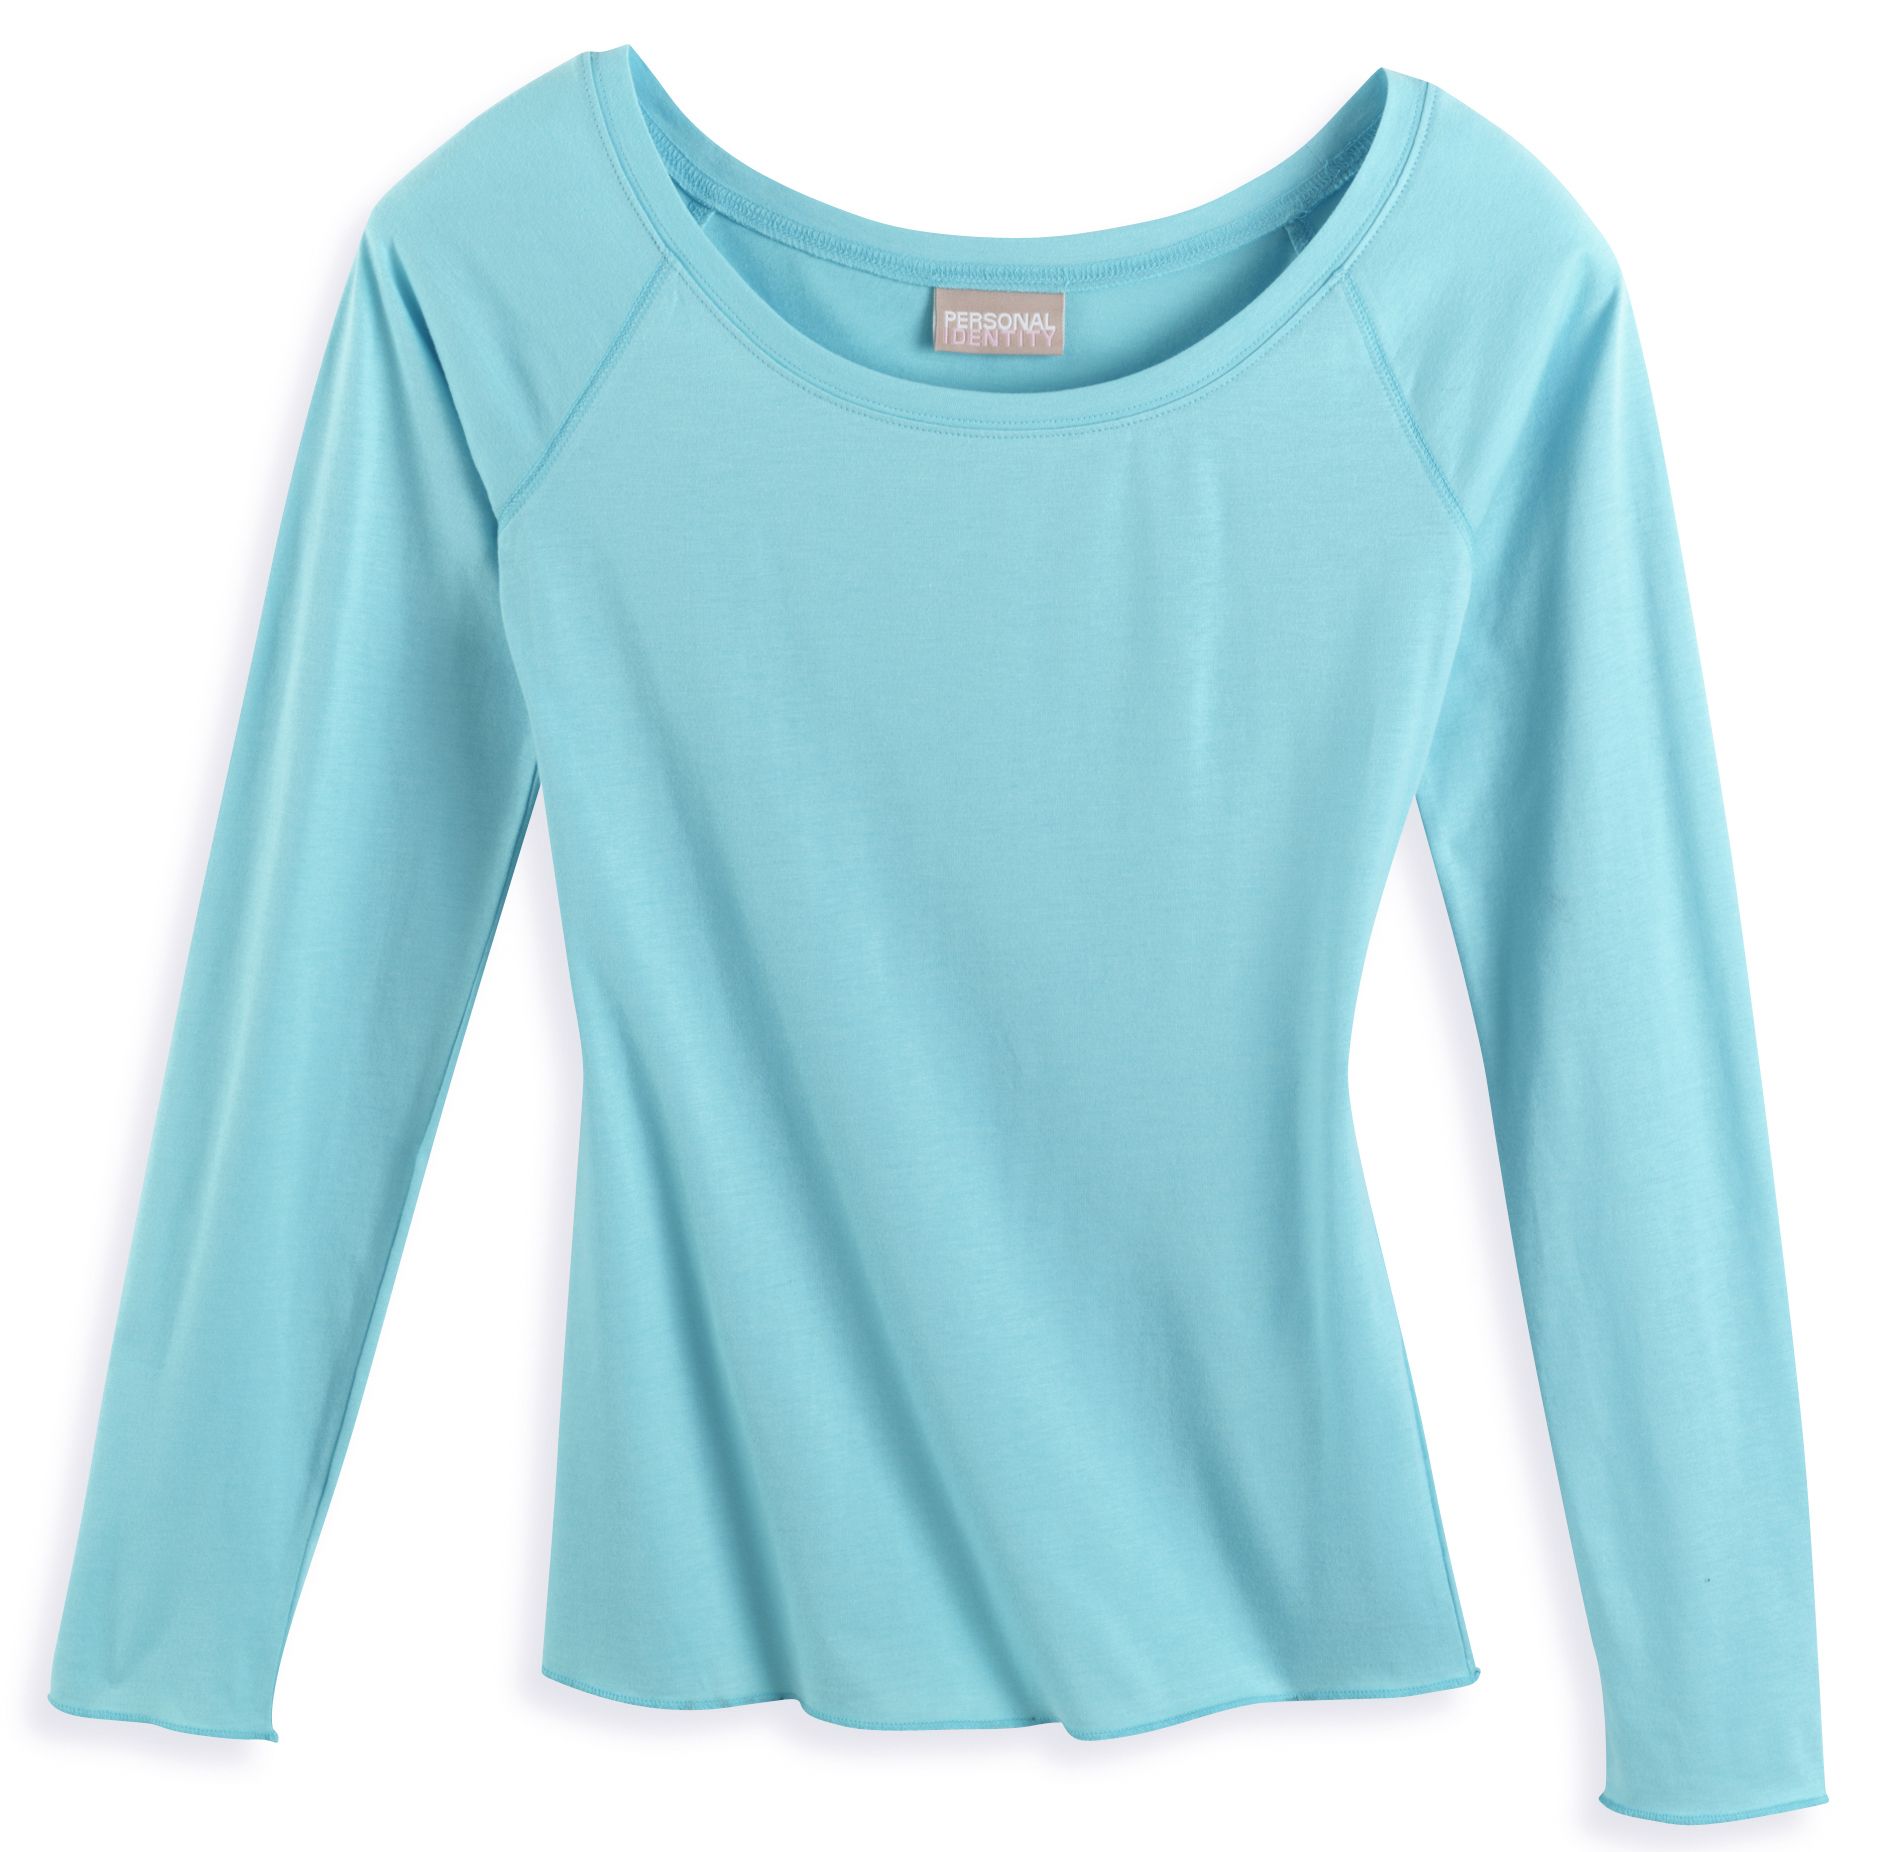 Personal Identity Long Sleeve Ballet Neck Top